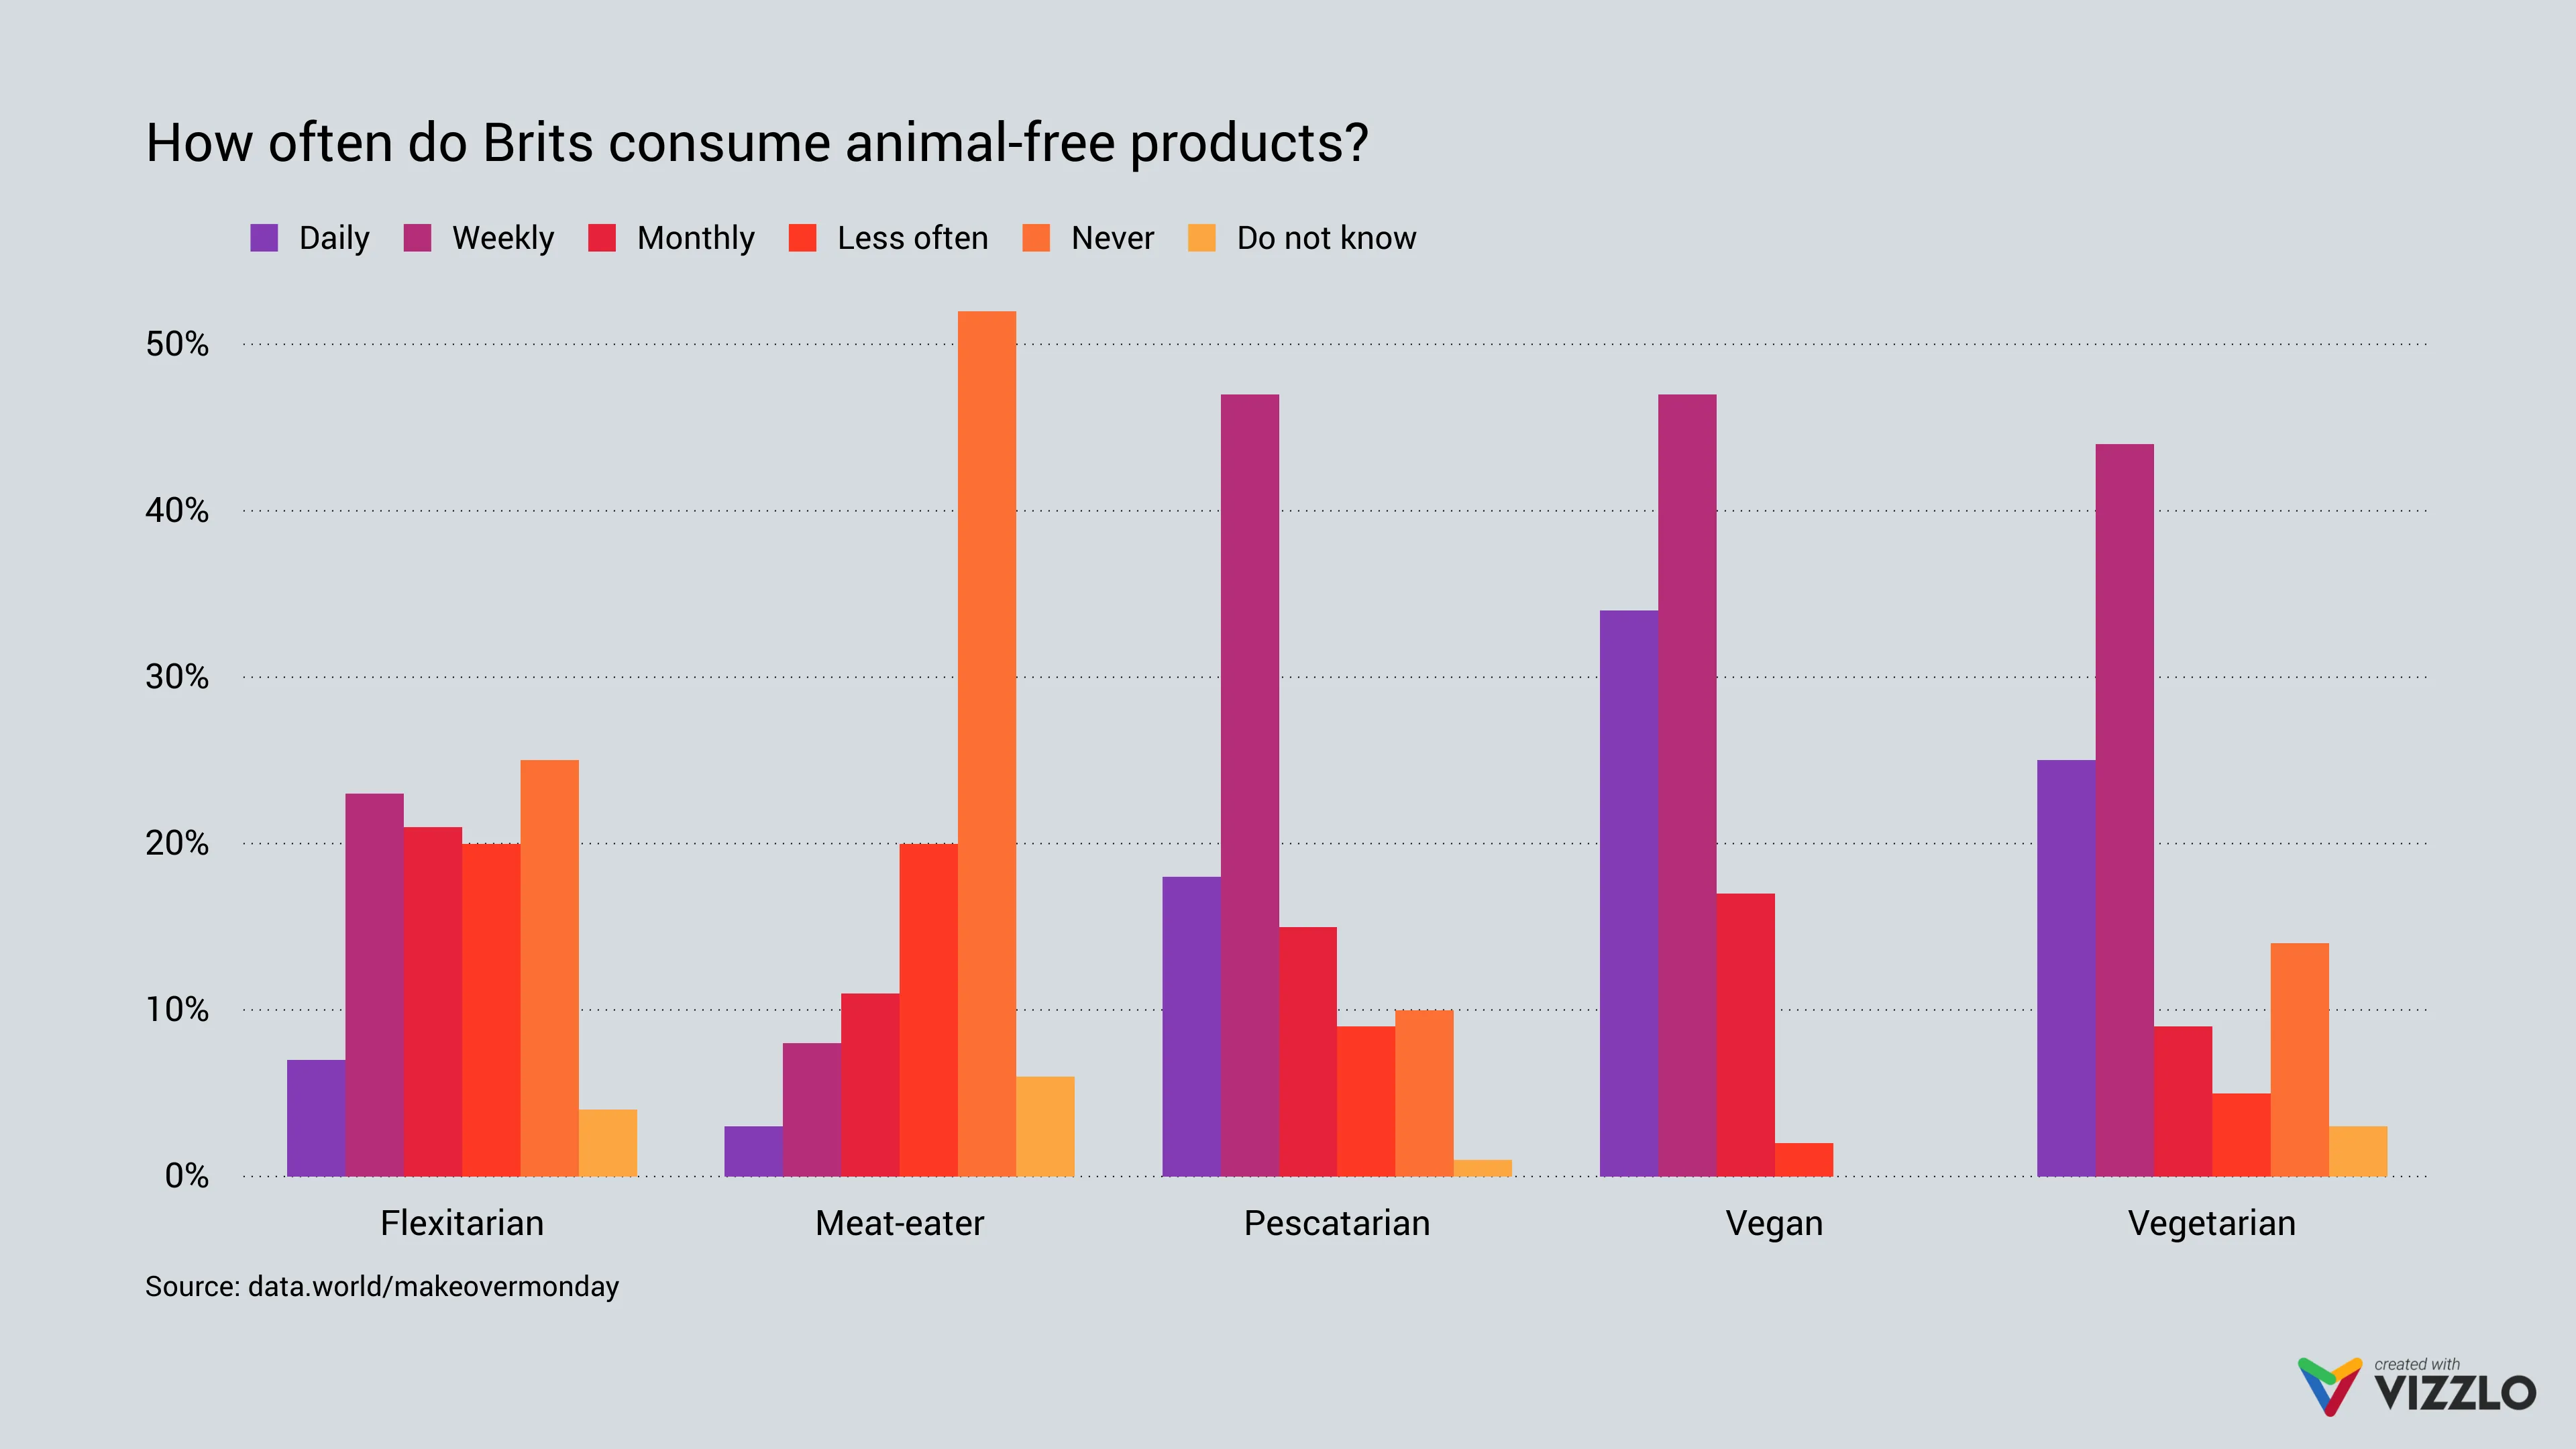 How often do Brits consume animal-free products?